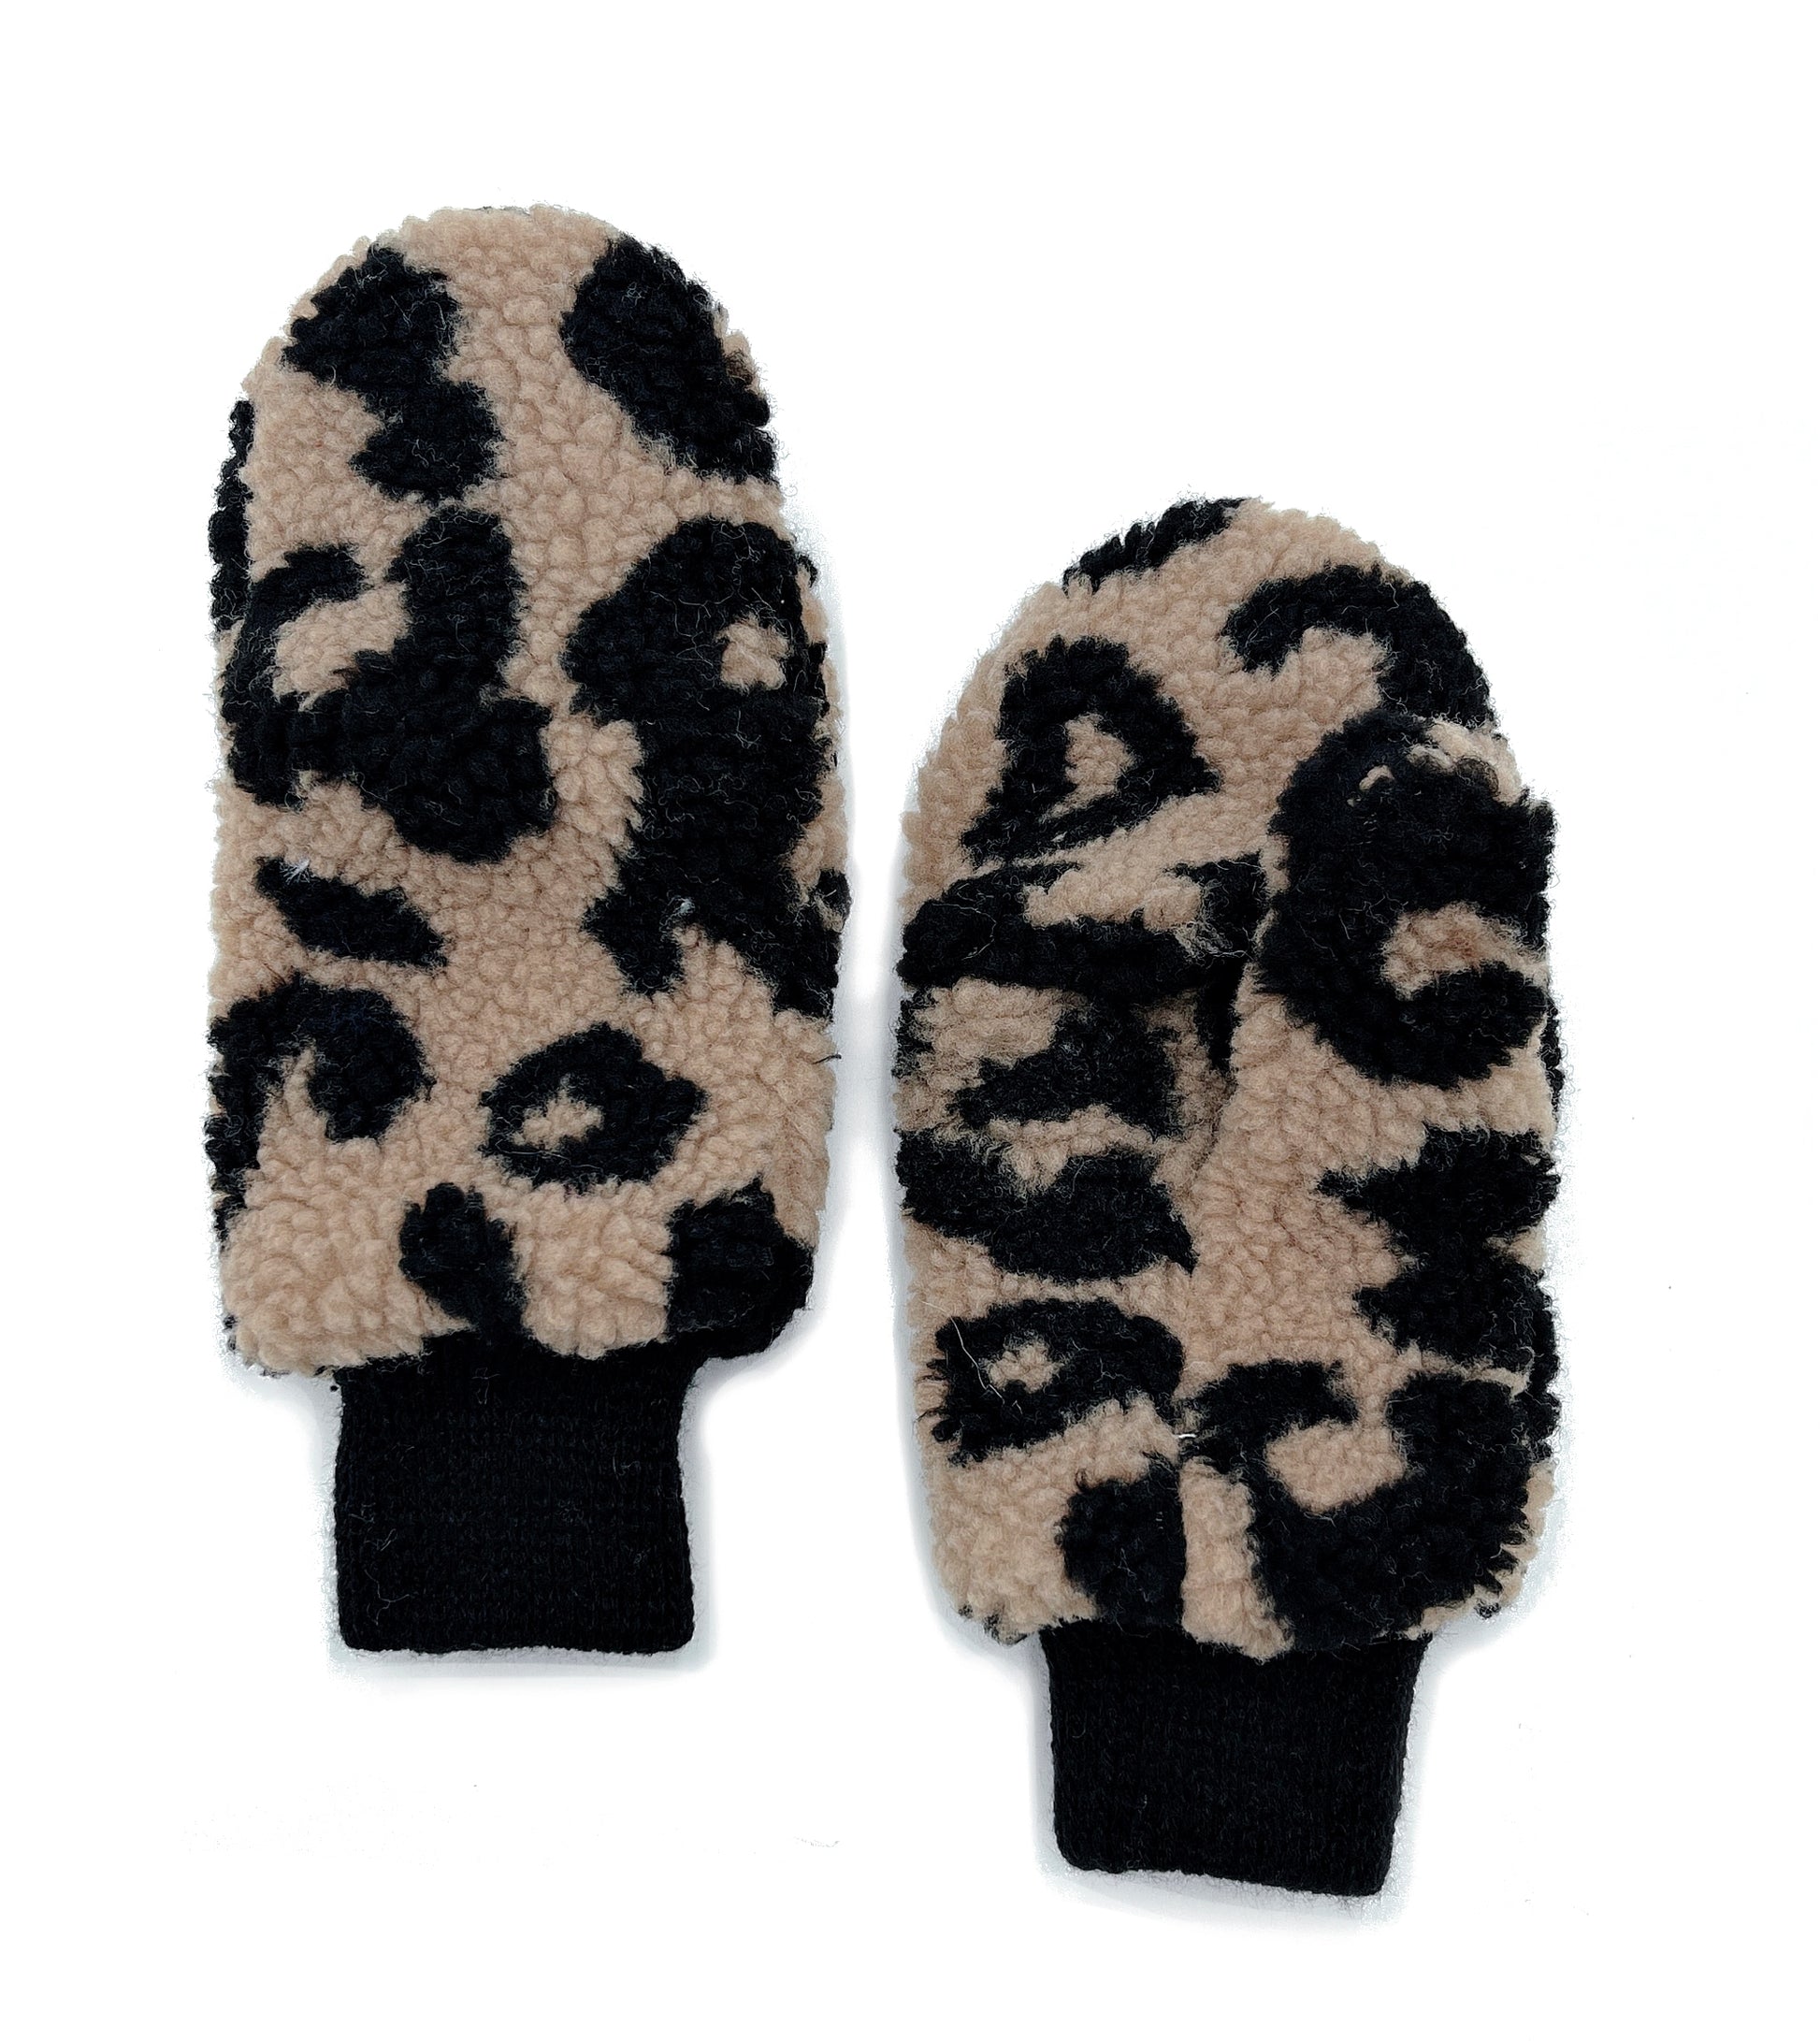 Shop for KW Fashion Leopard Teddy Pop-Top Mittens at doeverythinginloveny.com wholesale fashion accessories